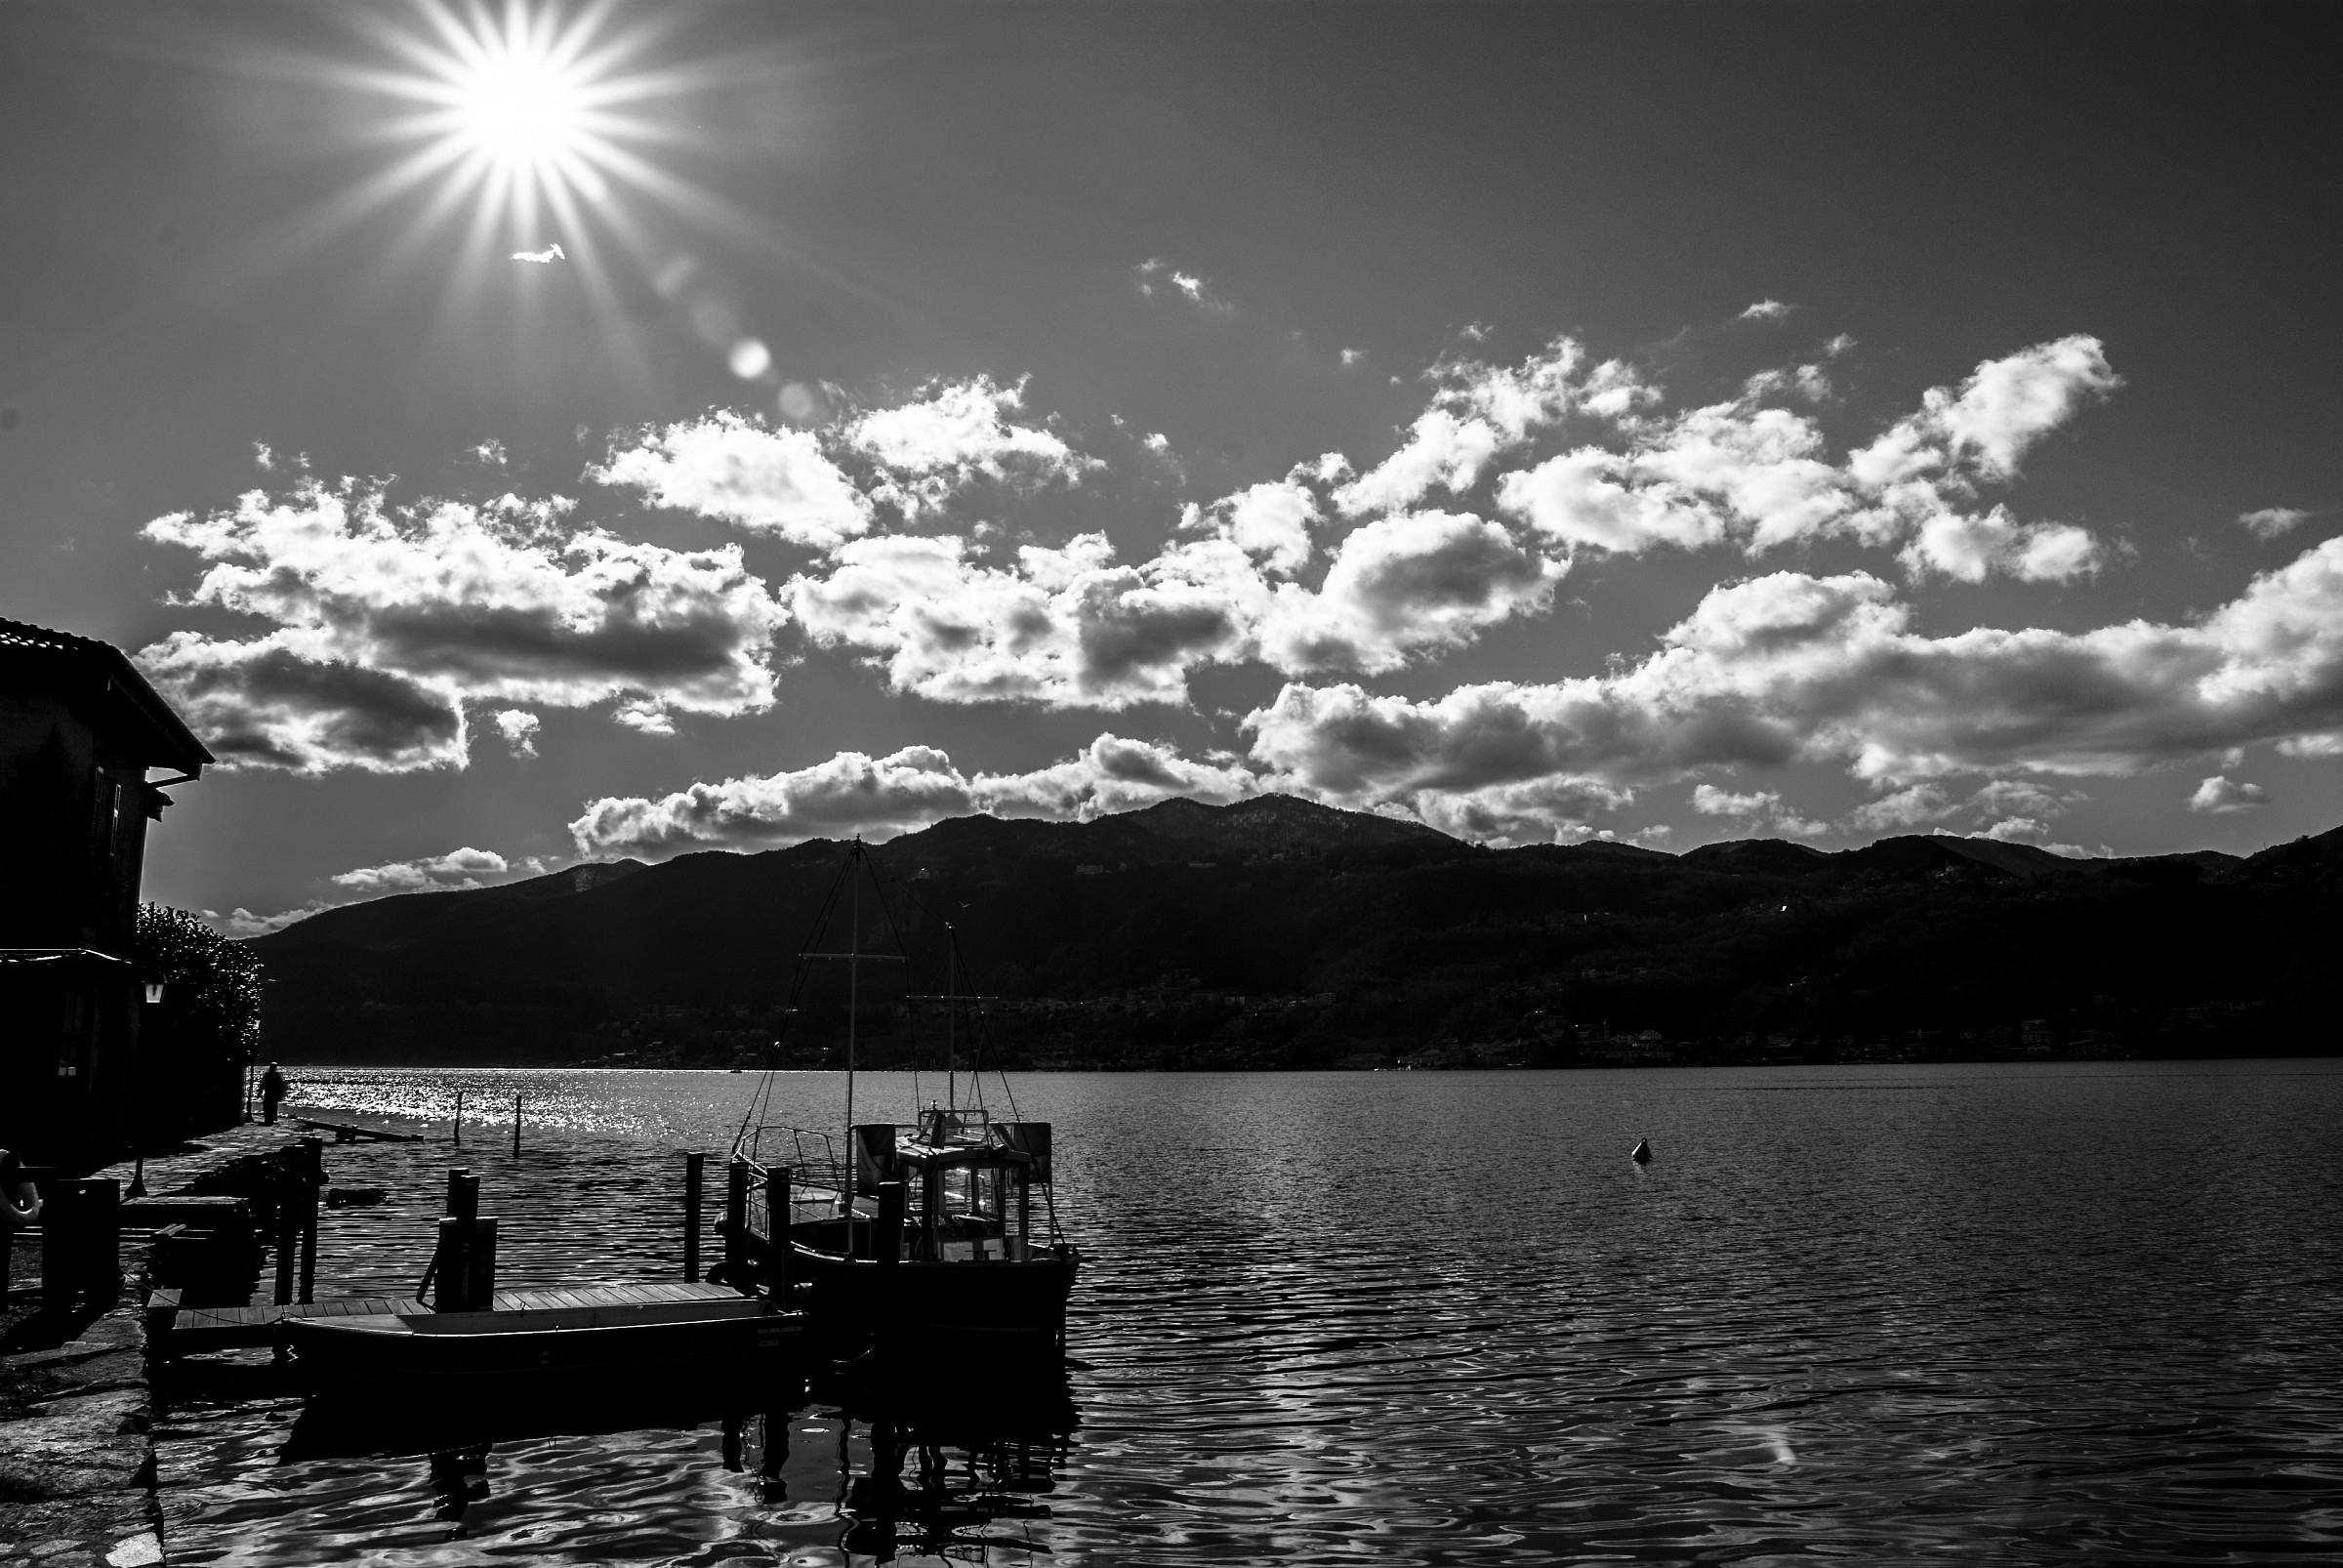 Orta lake in black and white...